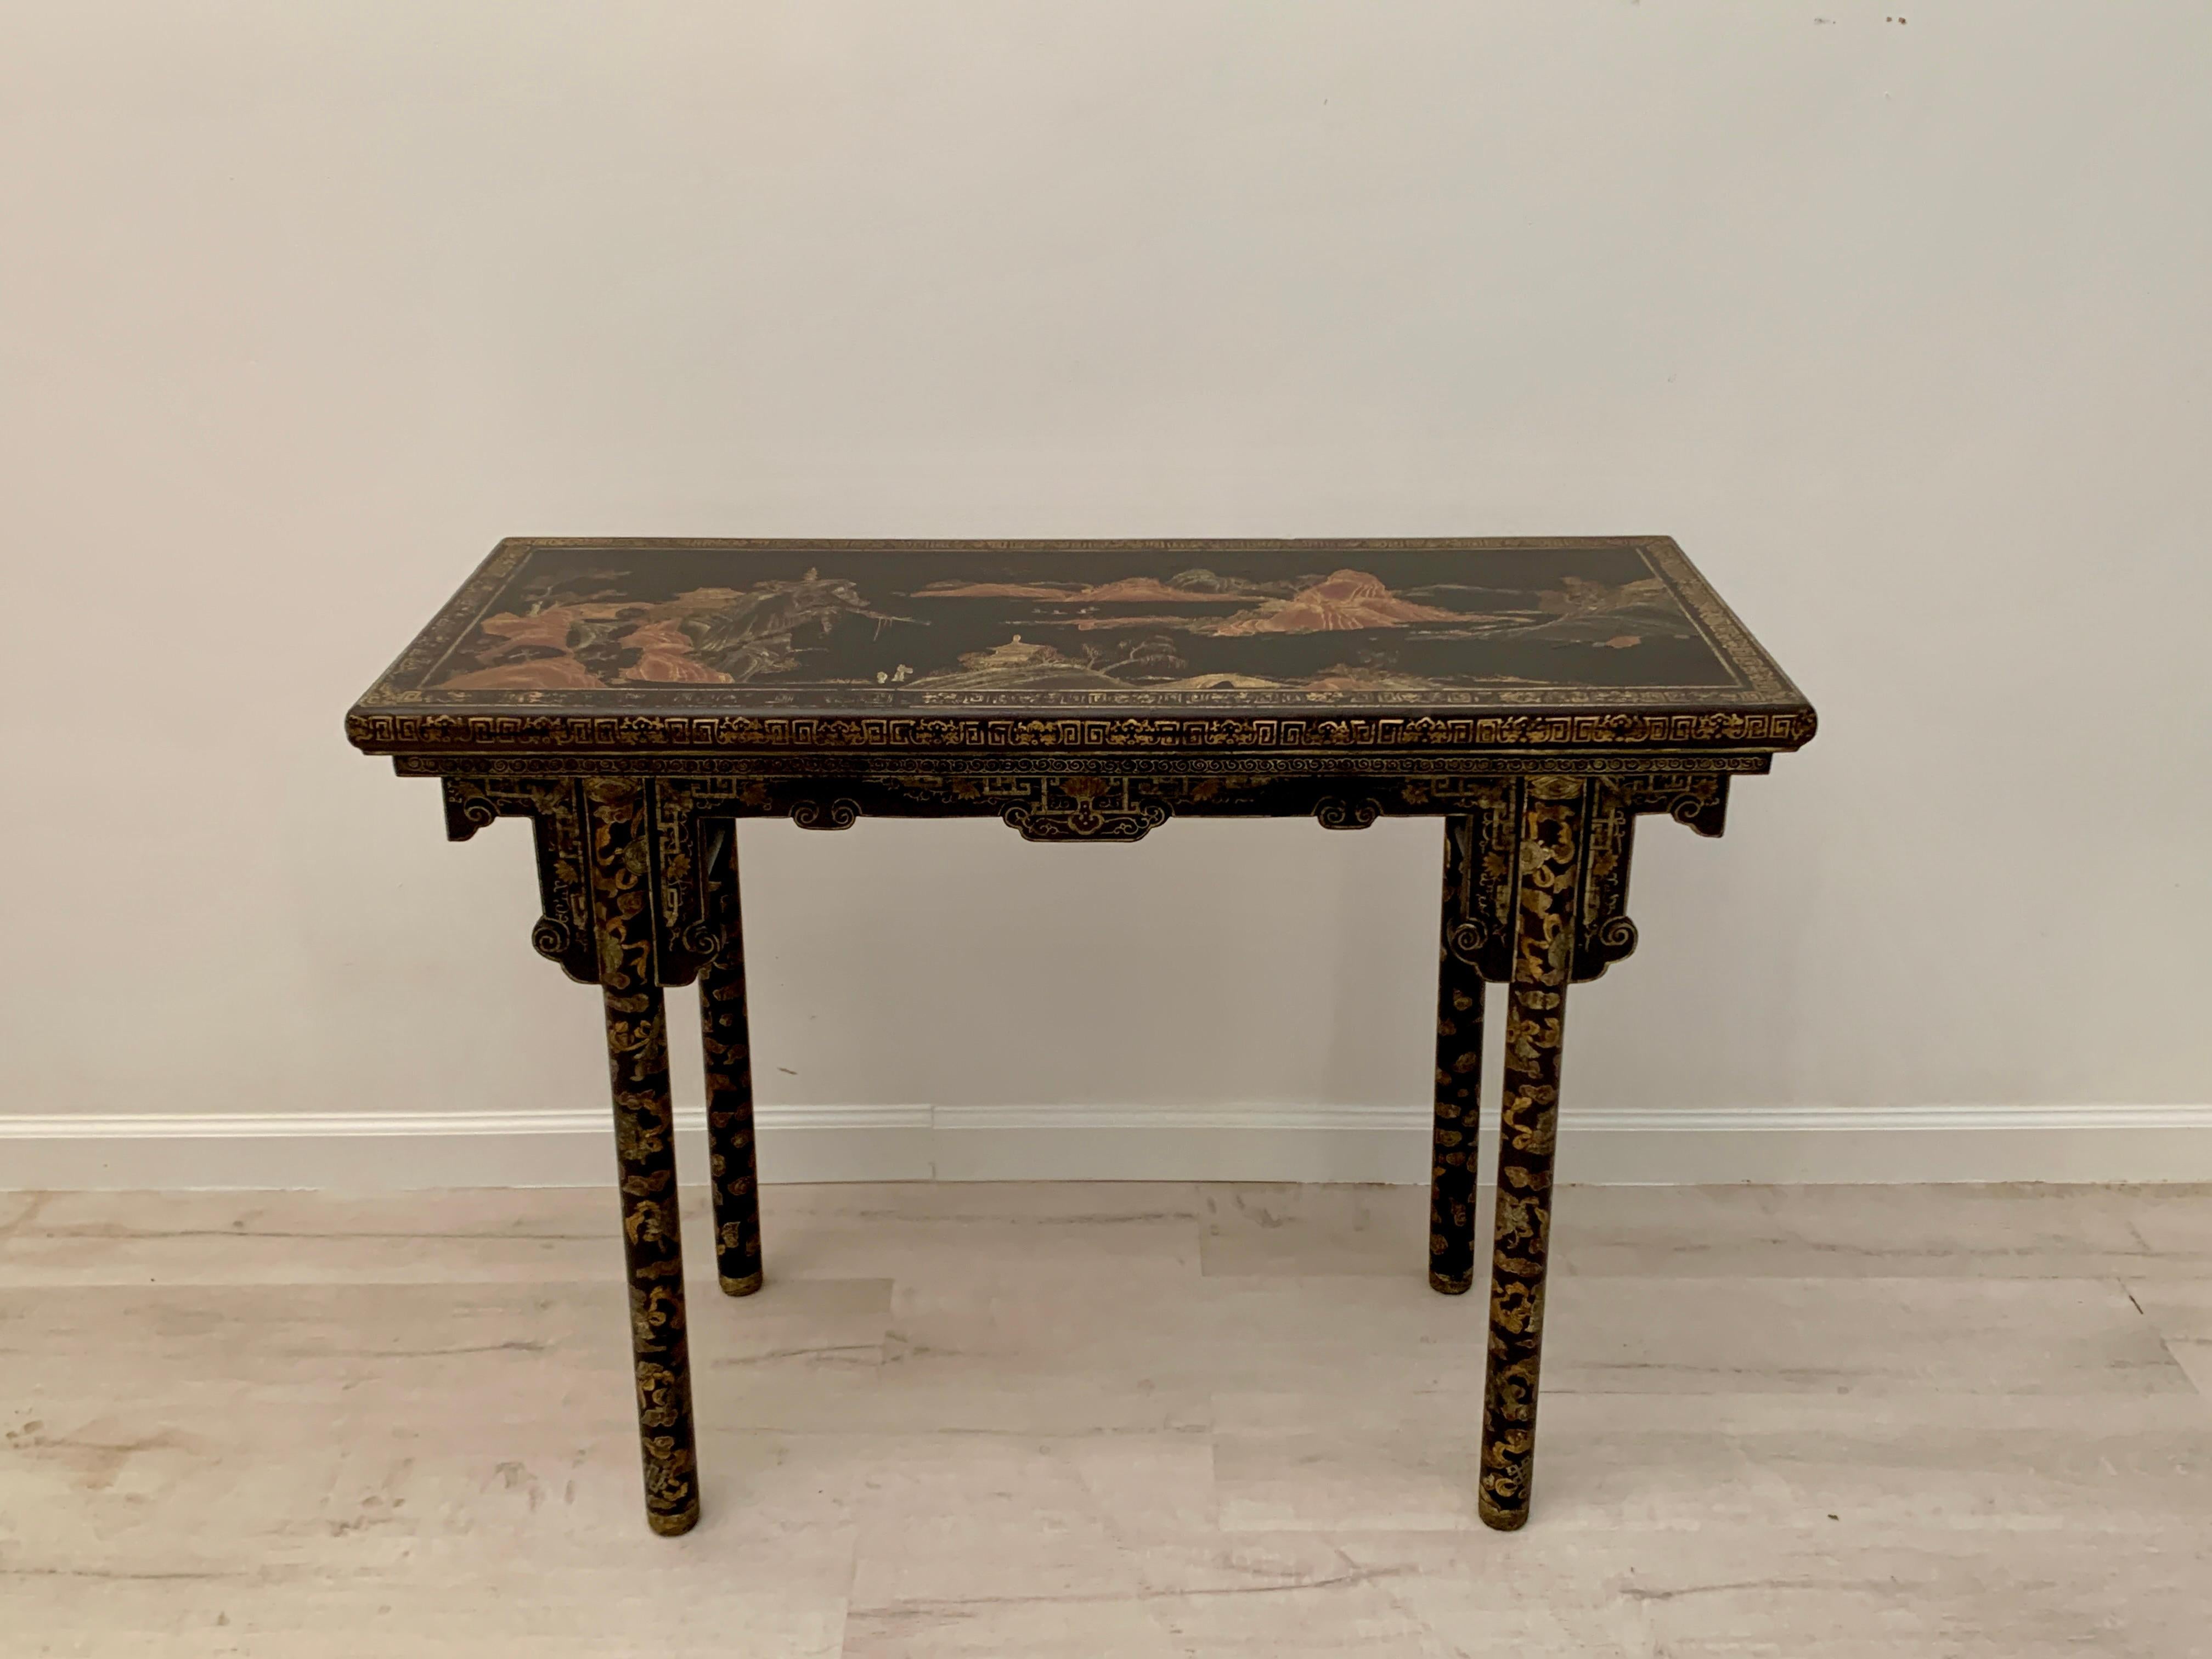 An absolutely lovely small Chinese black lacquer and gilt painted altar console, made for the export market, late Qing Dynasty or early Republic Period, early 20th century, China.

The small and narrow Chinese export console table, sometimes